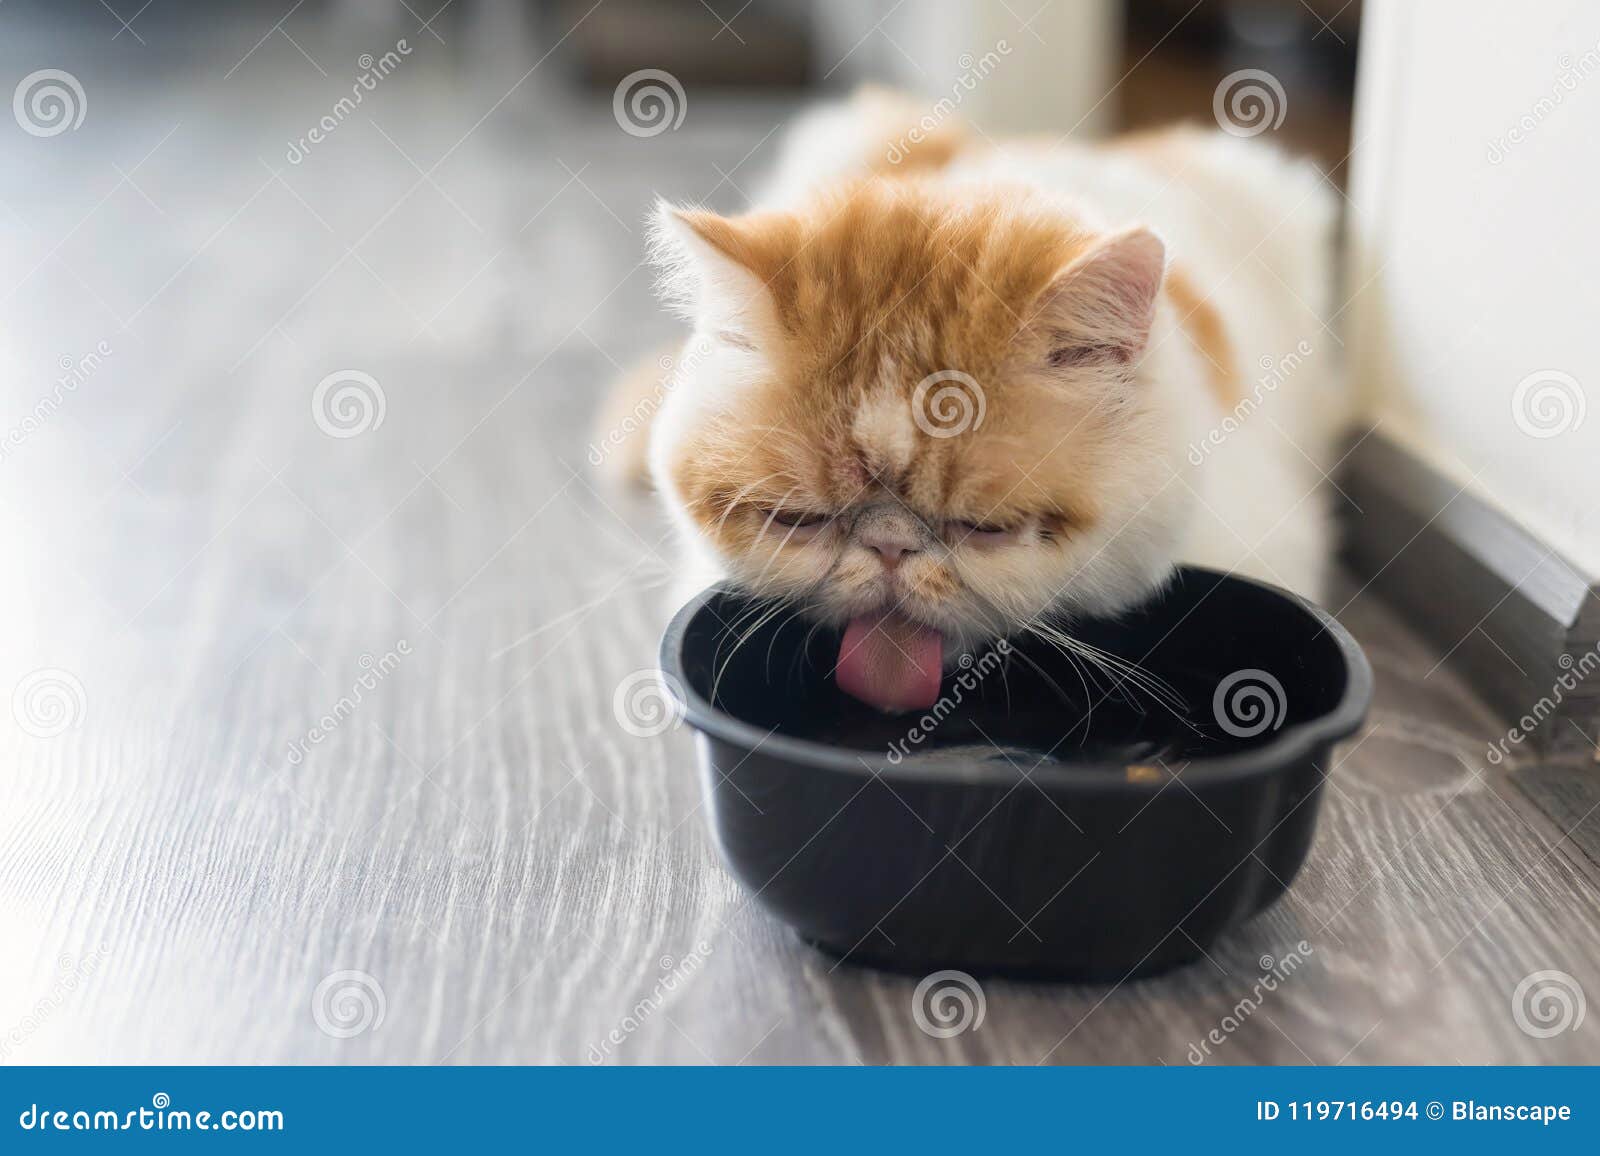 Exotic Shorthair Cat Drink Water In Room Stock Photo Image of mature